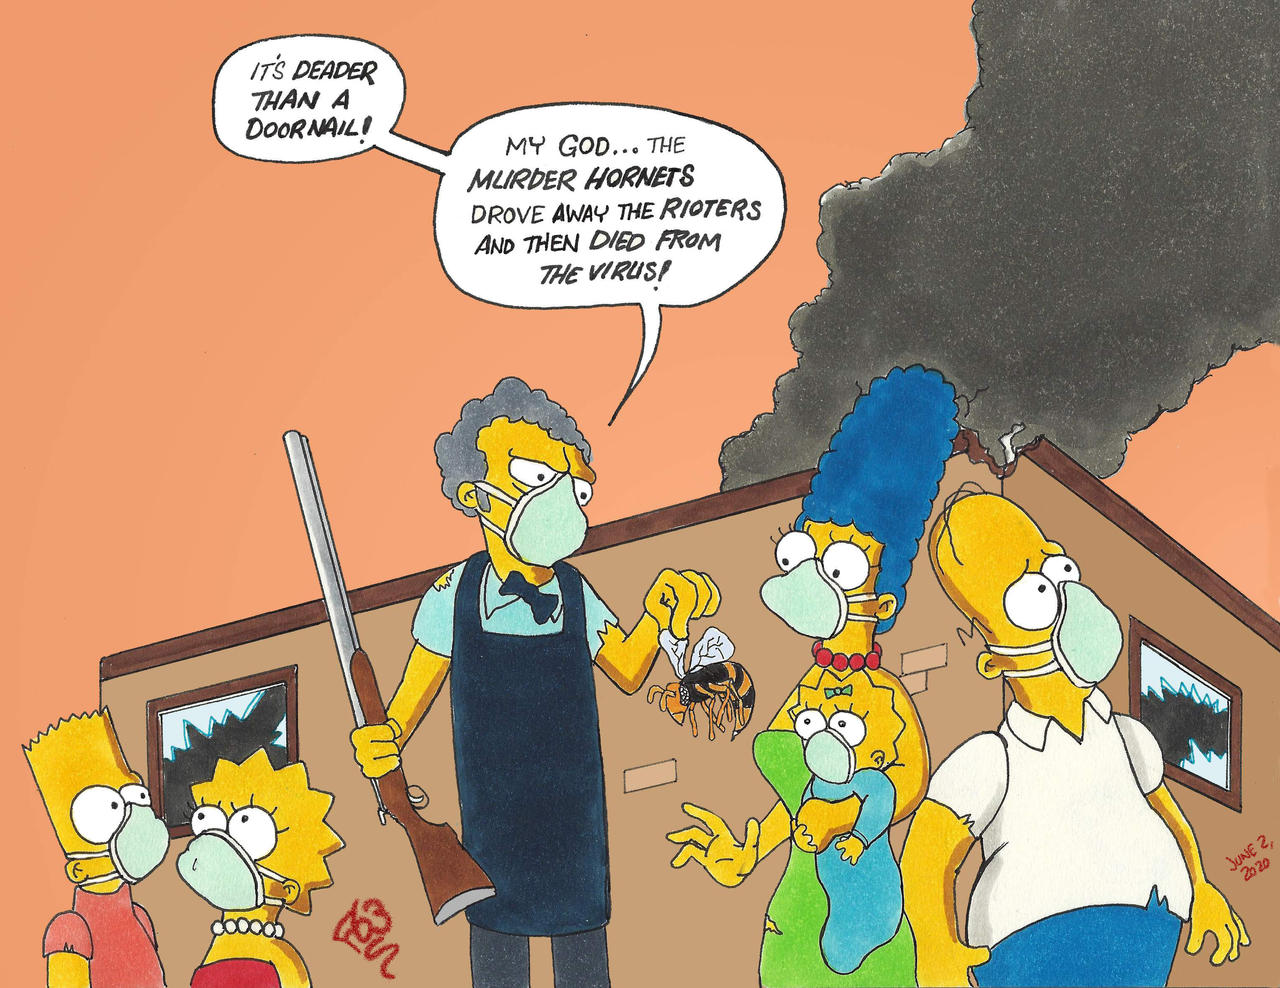 95 Quotes From The Simpsons And Other Residents of Springfield